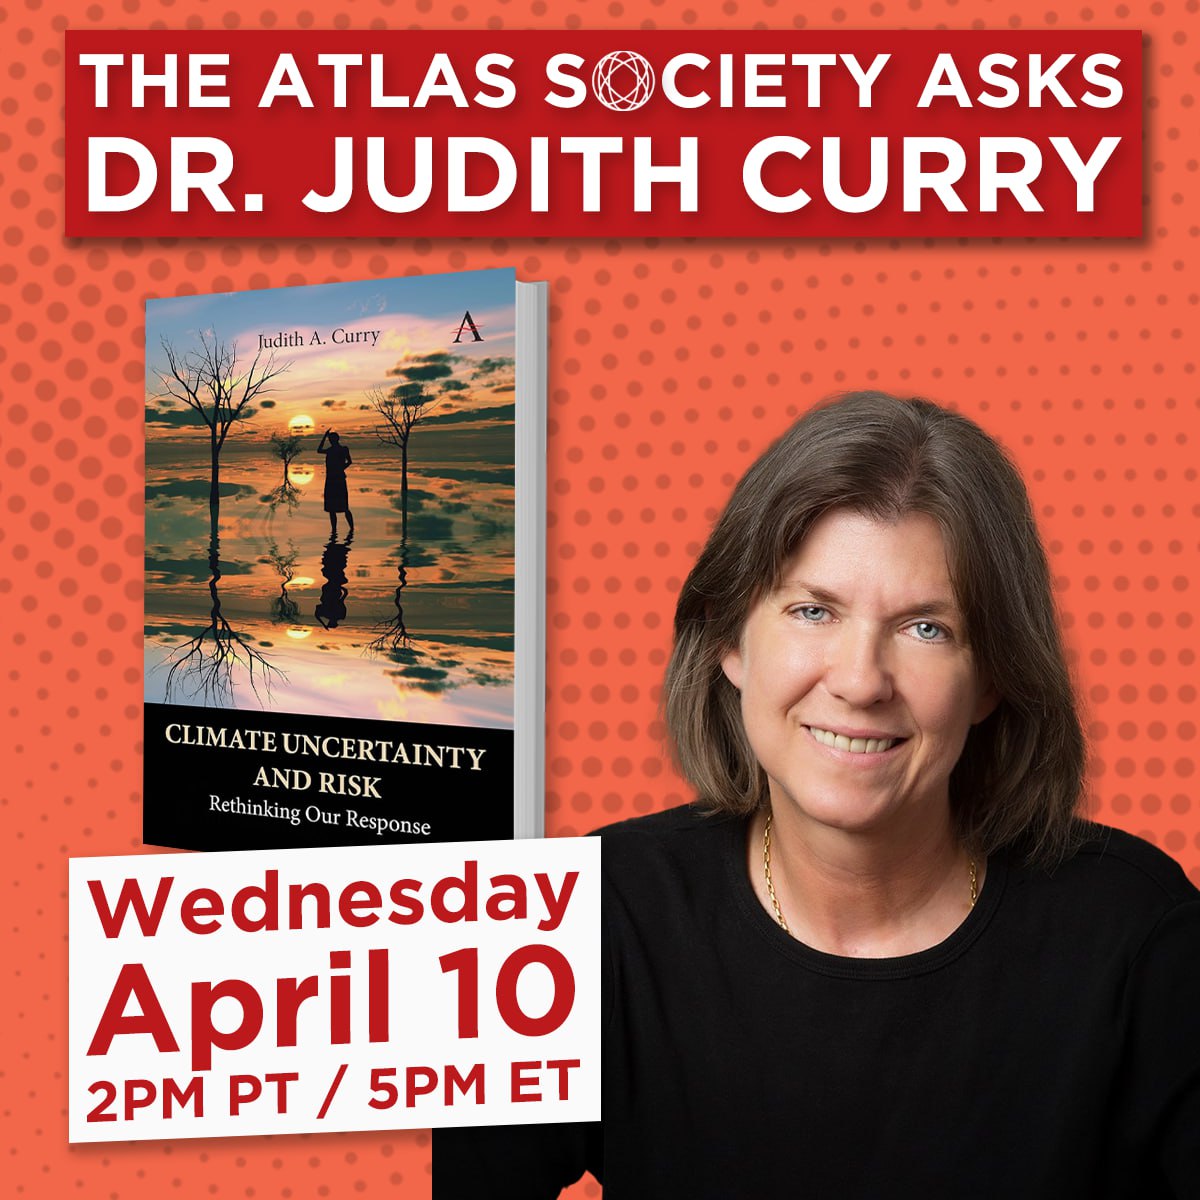 Climate Uncertainty and Risk: The Atlas Society Asks Dr. Judith Curry